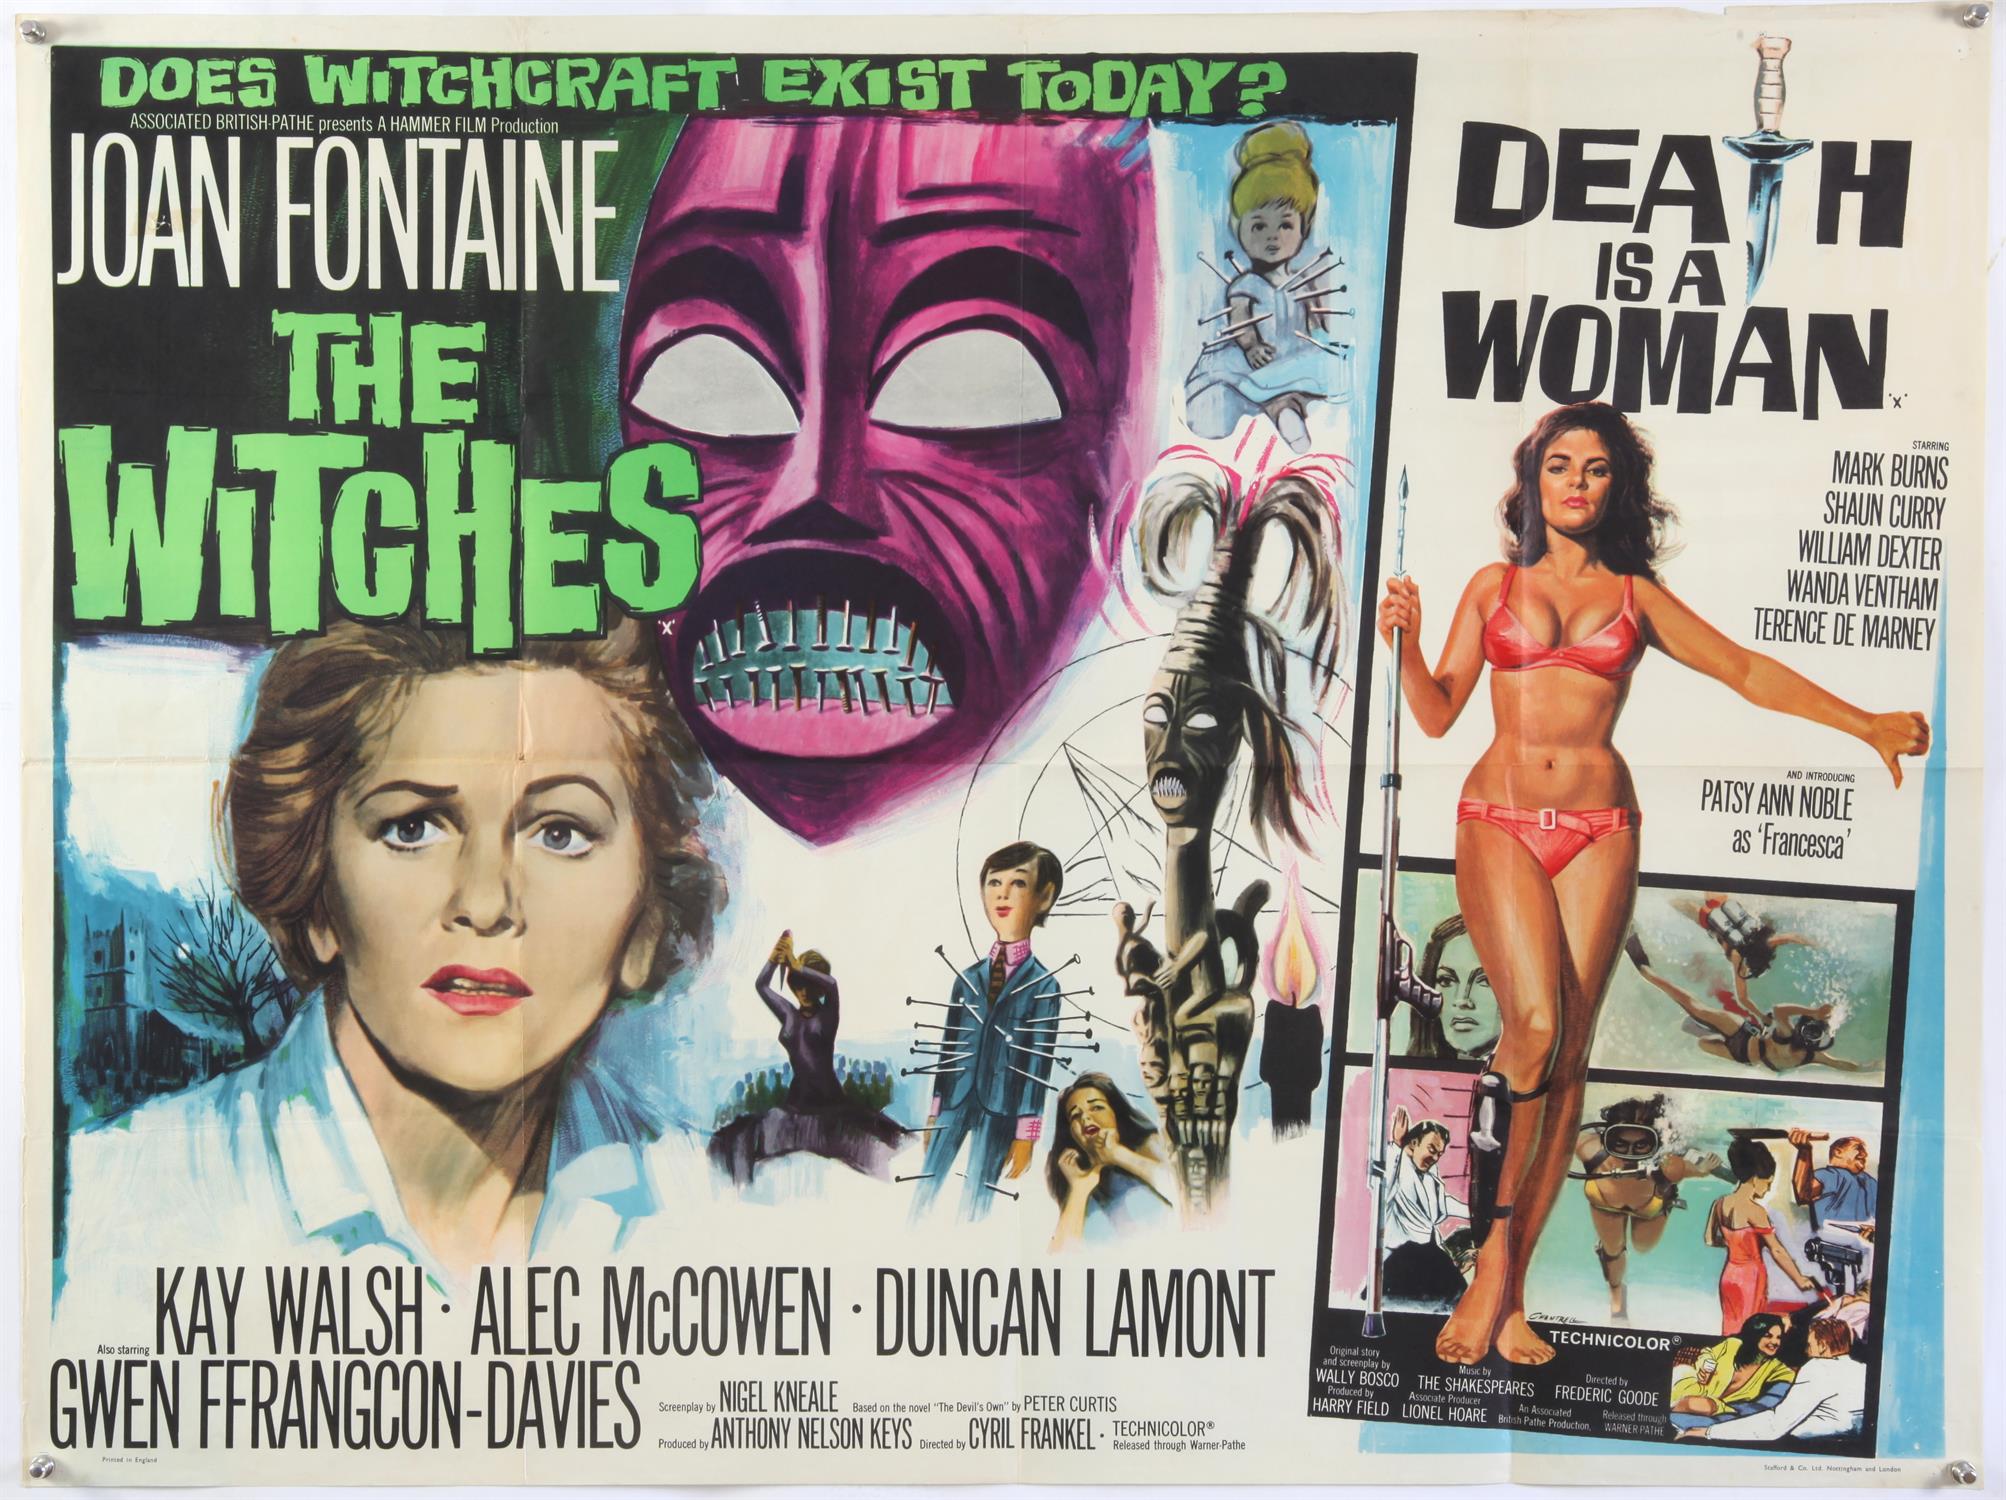 The Witches / Death Is a Woman - British Quad film poster, Hammer Horror, folded, 30 x 40 inches.